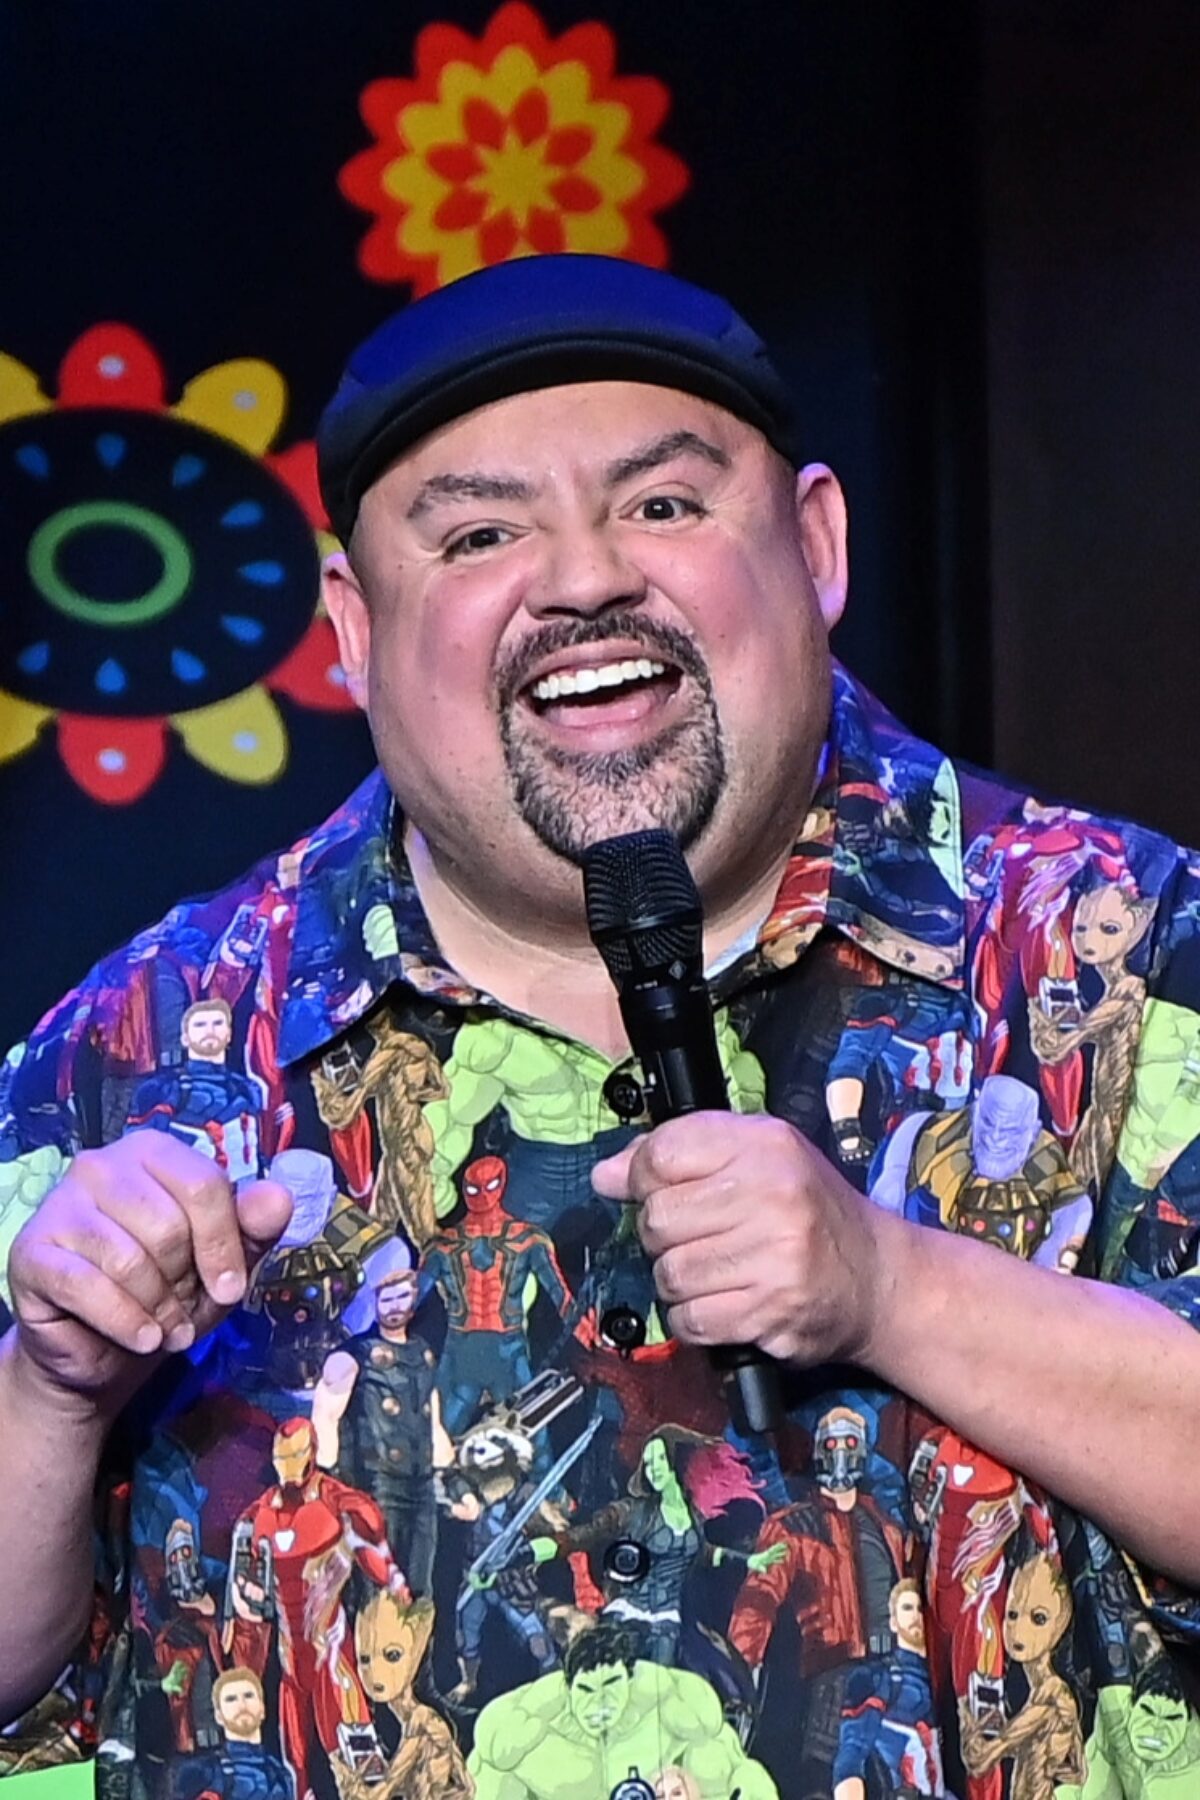 ATLANTA, GEORGIA - DECEMBER 02: Comedian Gabriel ‘Fluffy’ Iglesias performs onstage at State Farm Arena on December 02, 2021 in Atlanta, Georgia. (Photo by Paras Griffin/Getty Images)